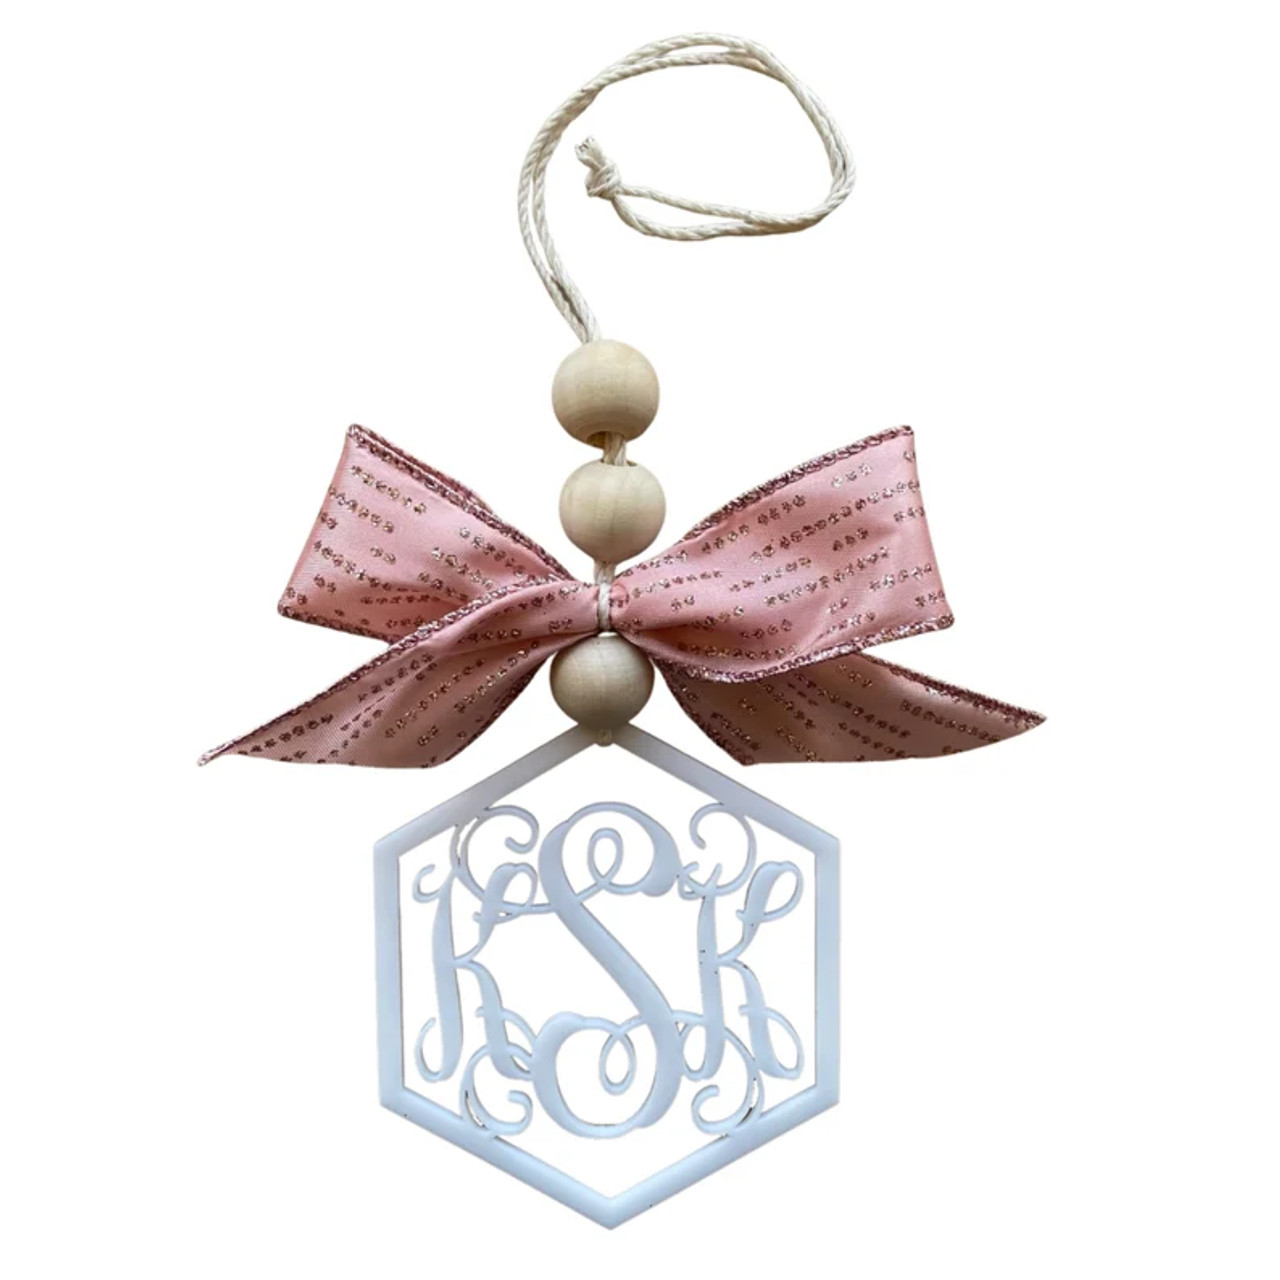 Personalized Initial Mirror Charm, personalized Car Charm